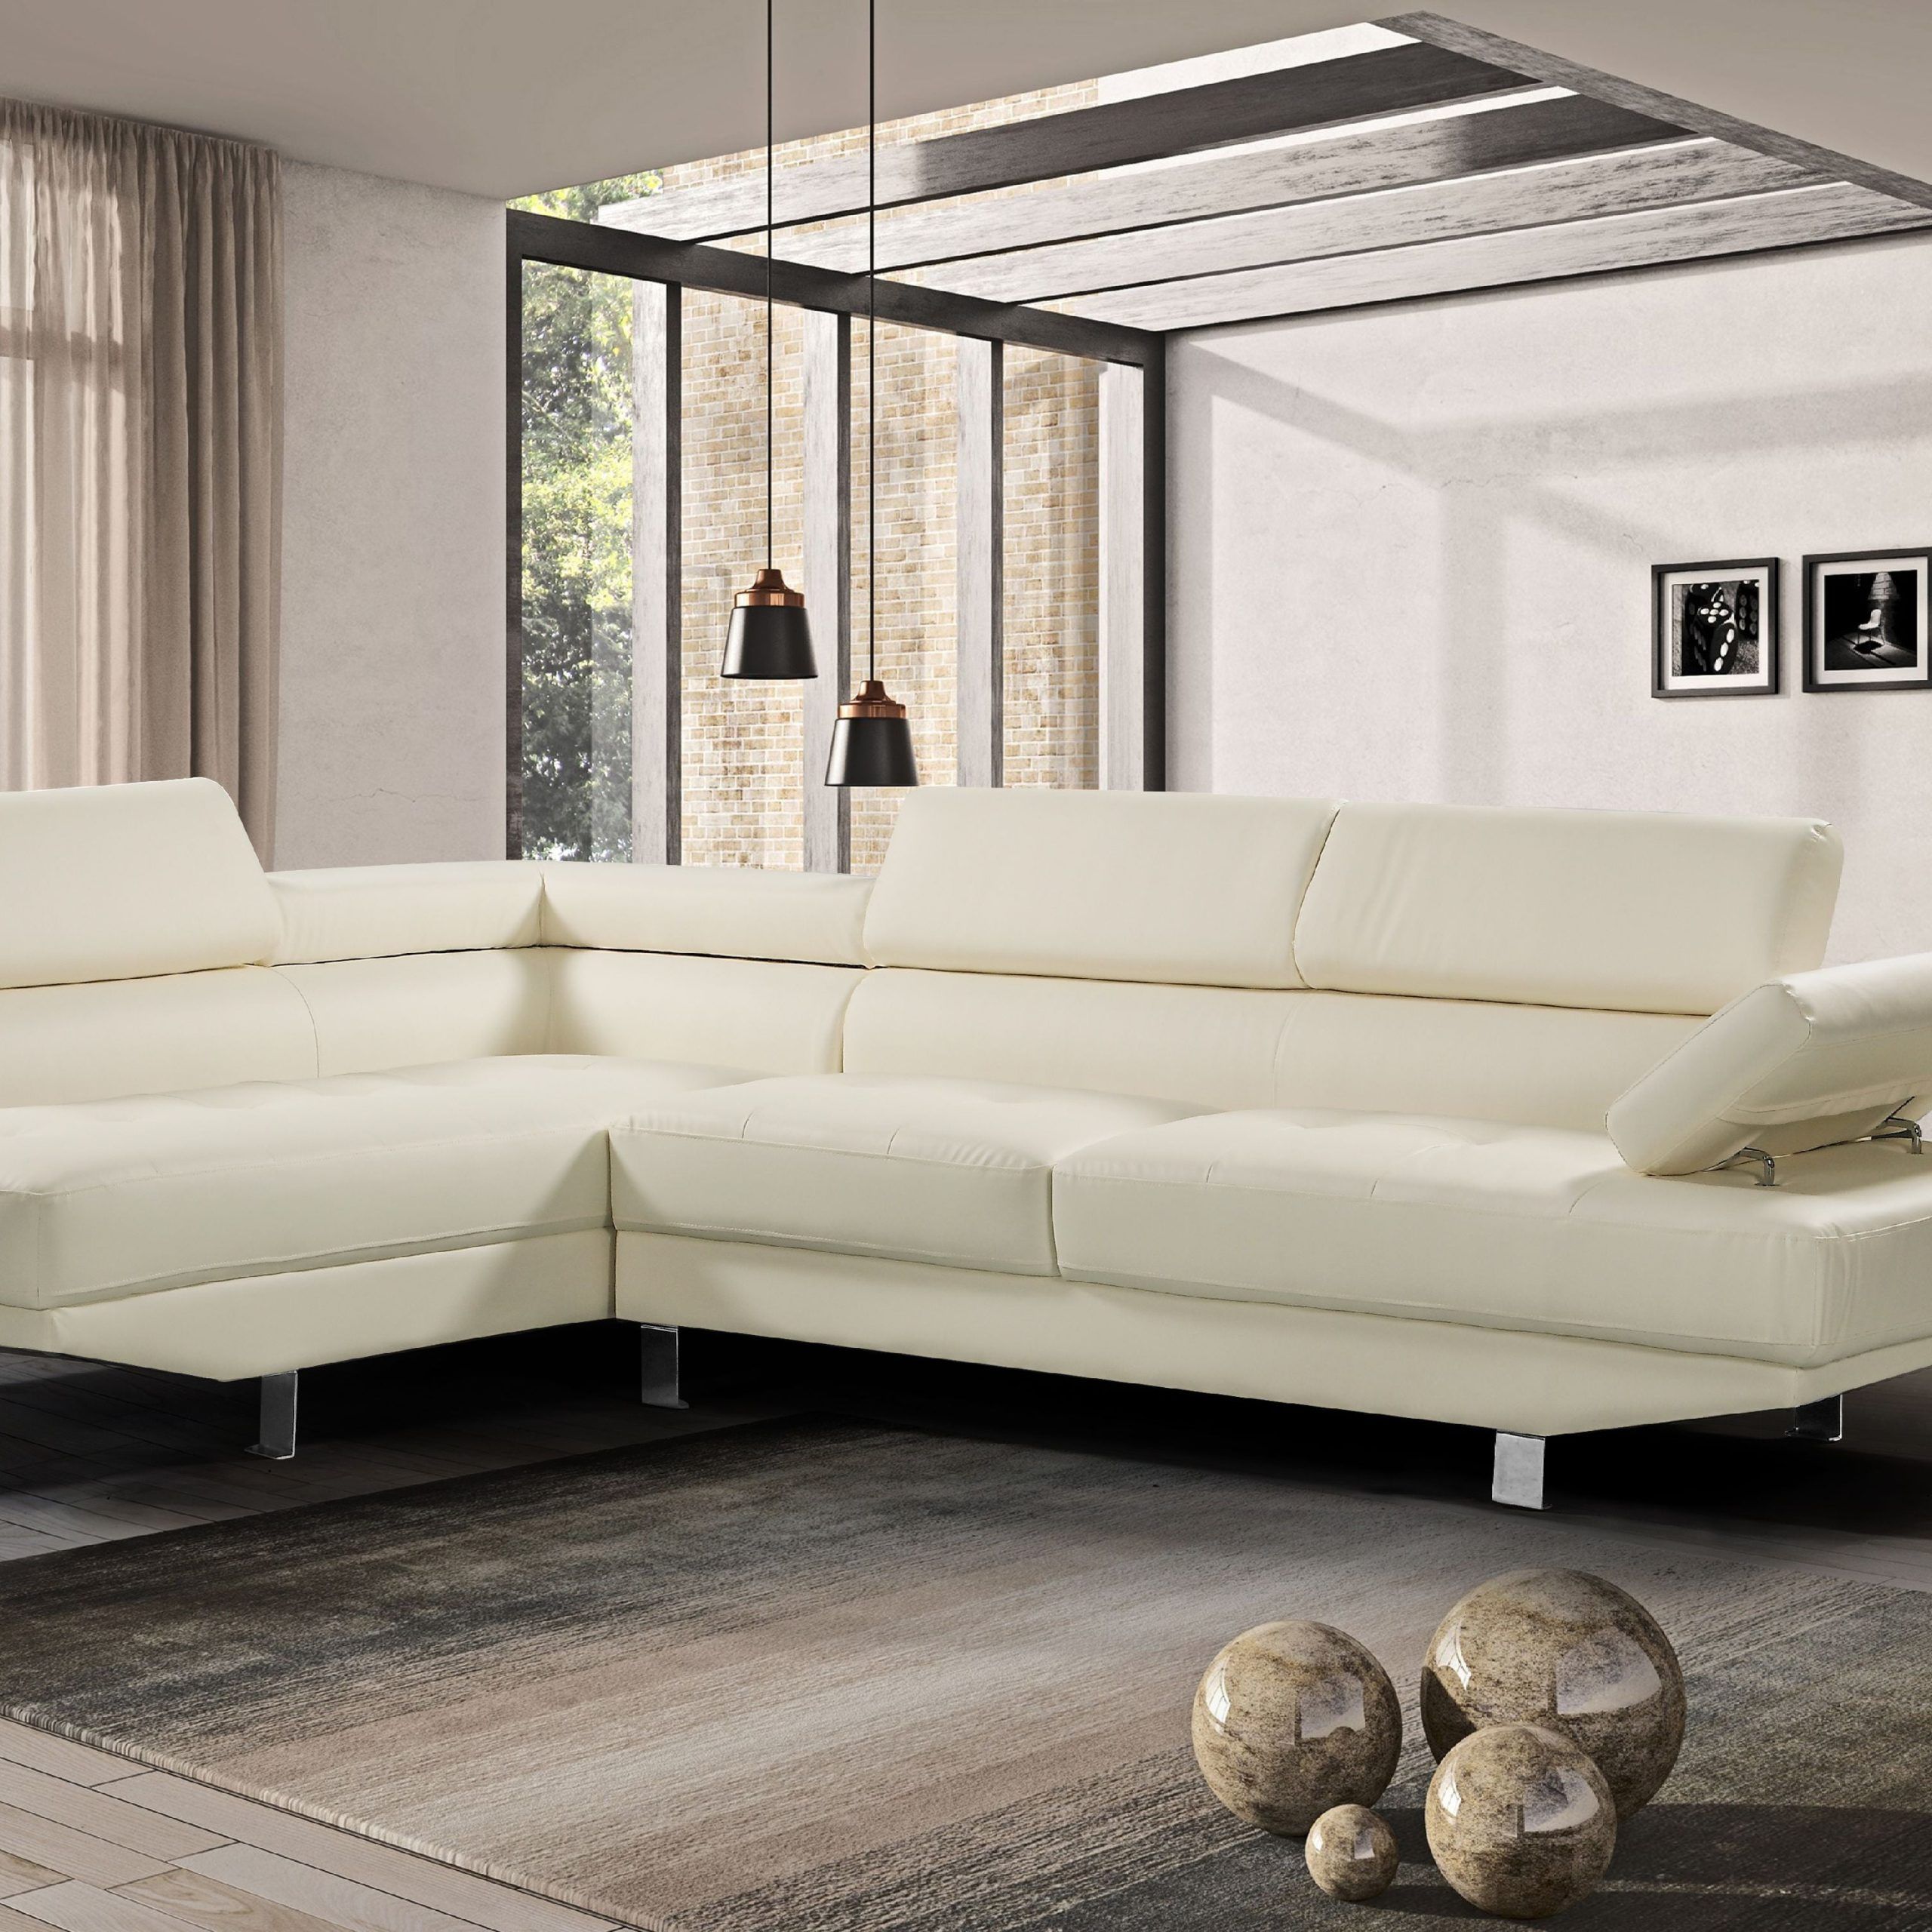 Trendy Harper&bright Designs Modern Faux Leather Sectional Sofa With Inside Faux Leather Sofas (View 11 of 15)